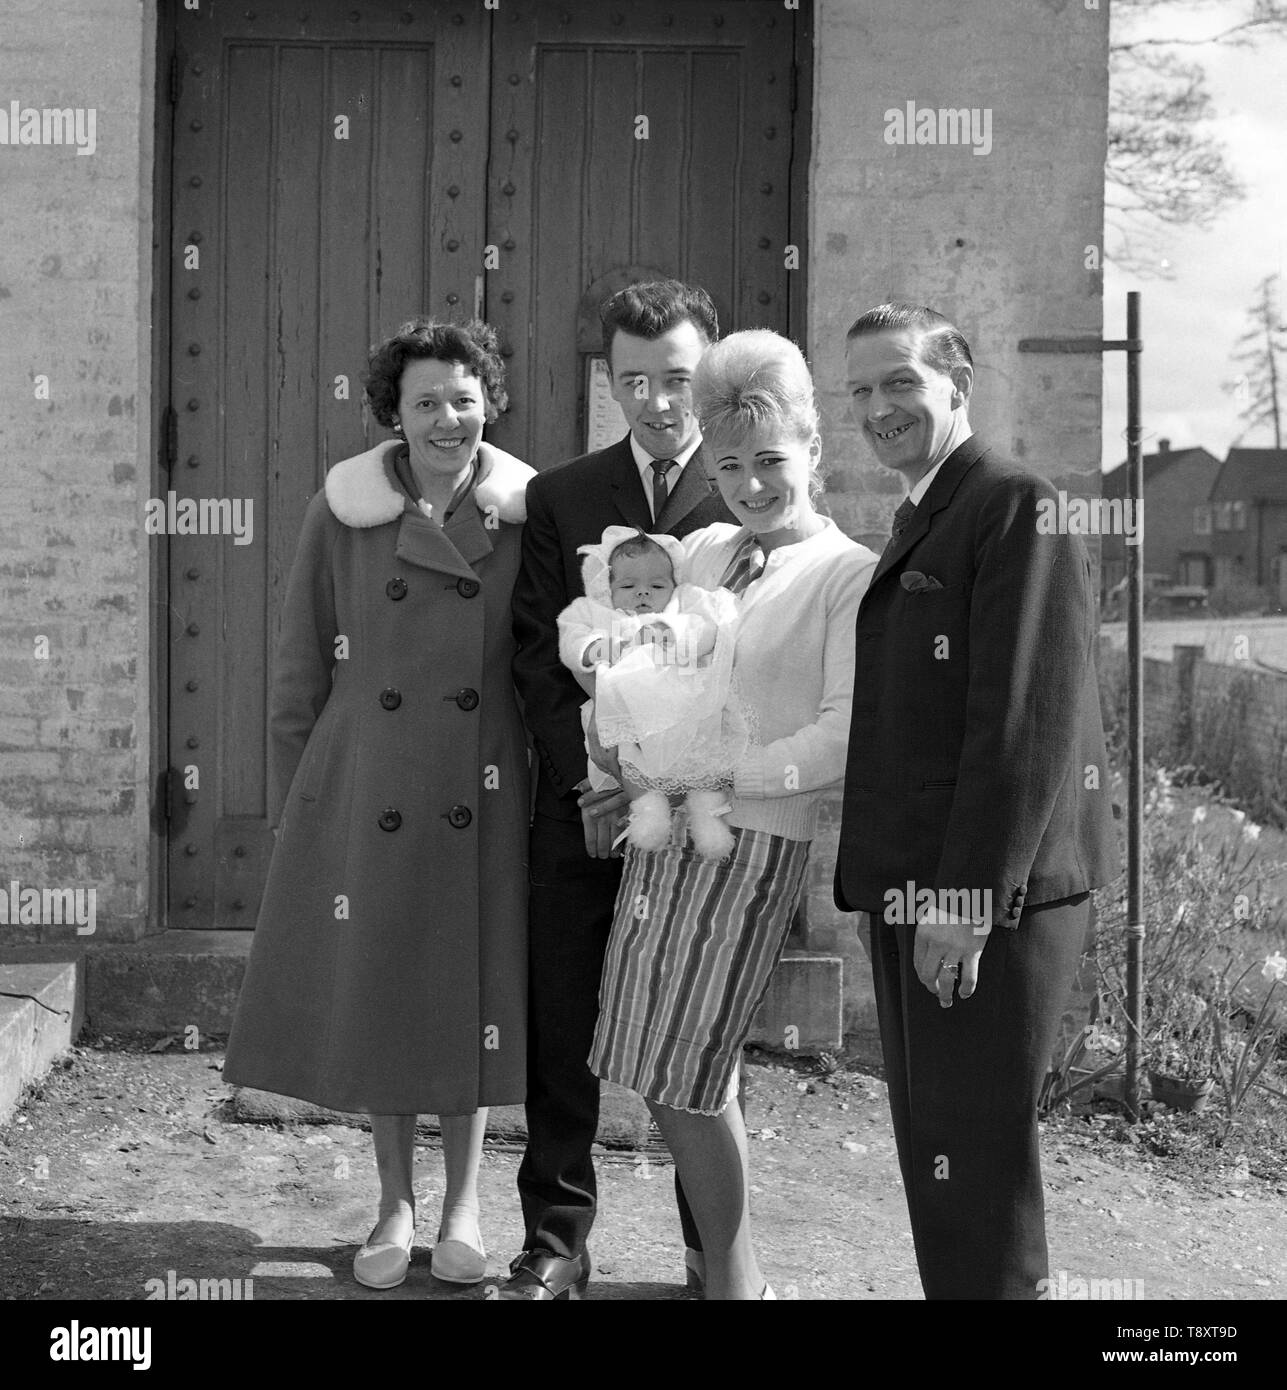 A Baby Christening in the UK c1962  Baby, Mum, Dad and grandparents  Photo by Tony Henshaw Stock Photo